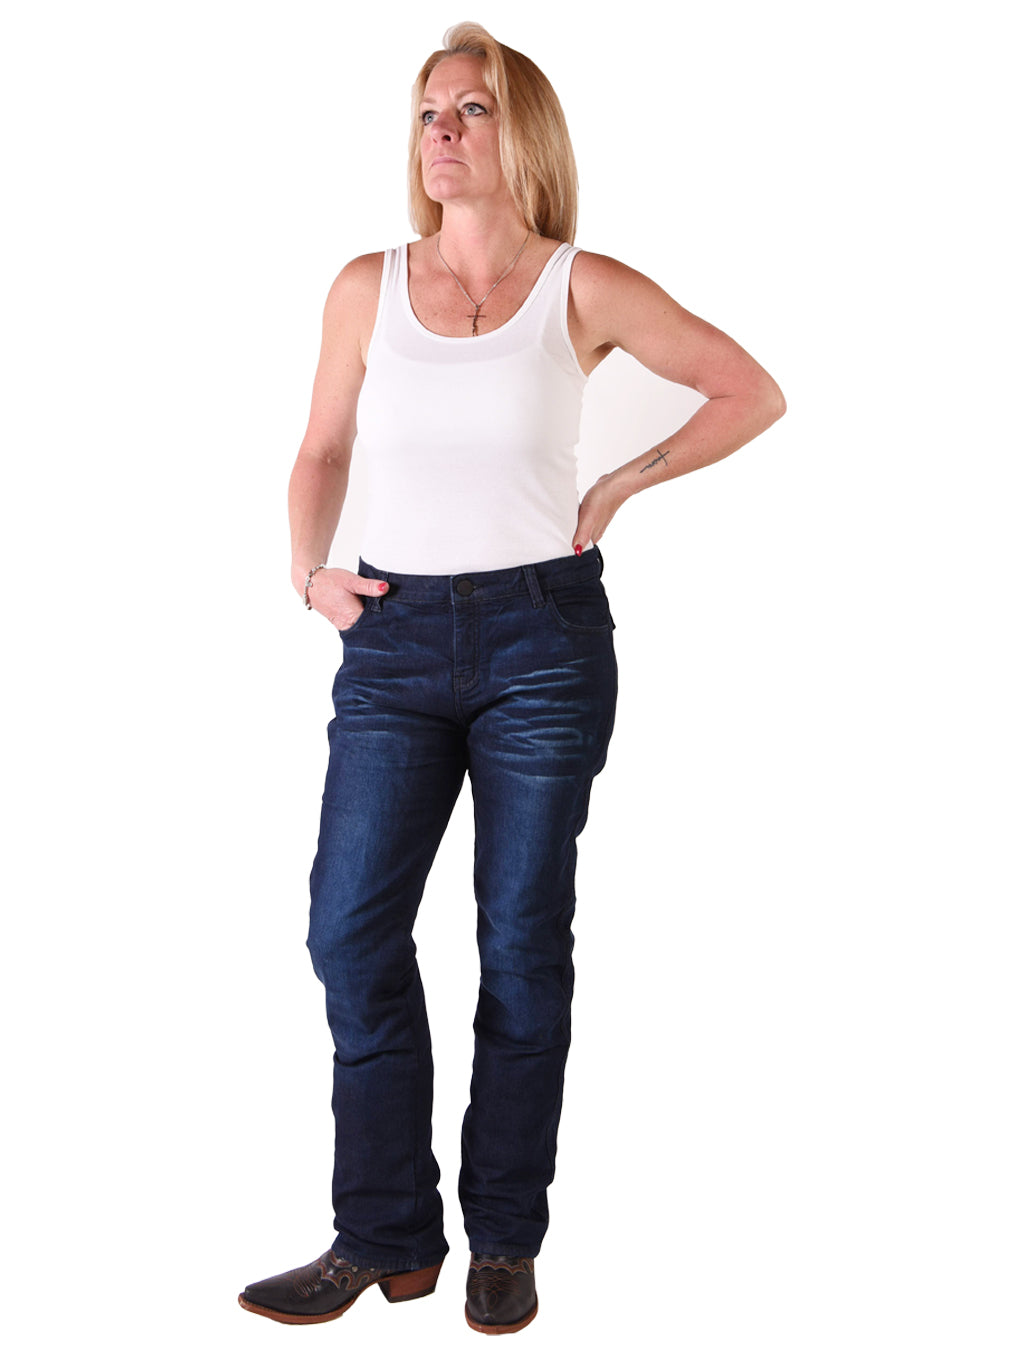 Runaways - Women's Indigo Protective Motorcycle Jeans. Features Protective  DuPont™ Kevlar® Lining, 12.25 oz, Mt Vernon Mills, Ghirardelli Pre-washed  Stretch Denim. - Tobacco Motorwear